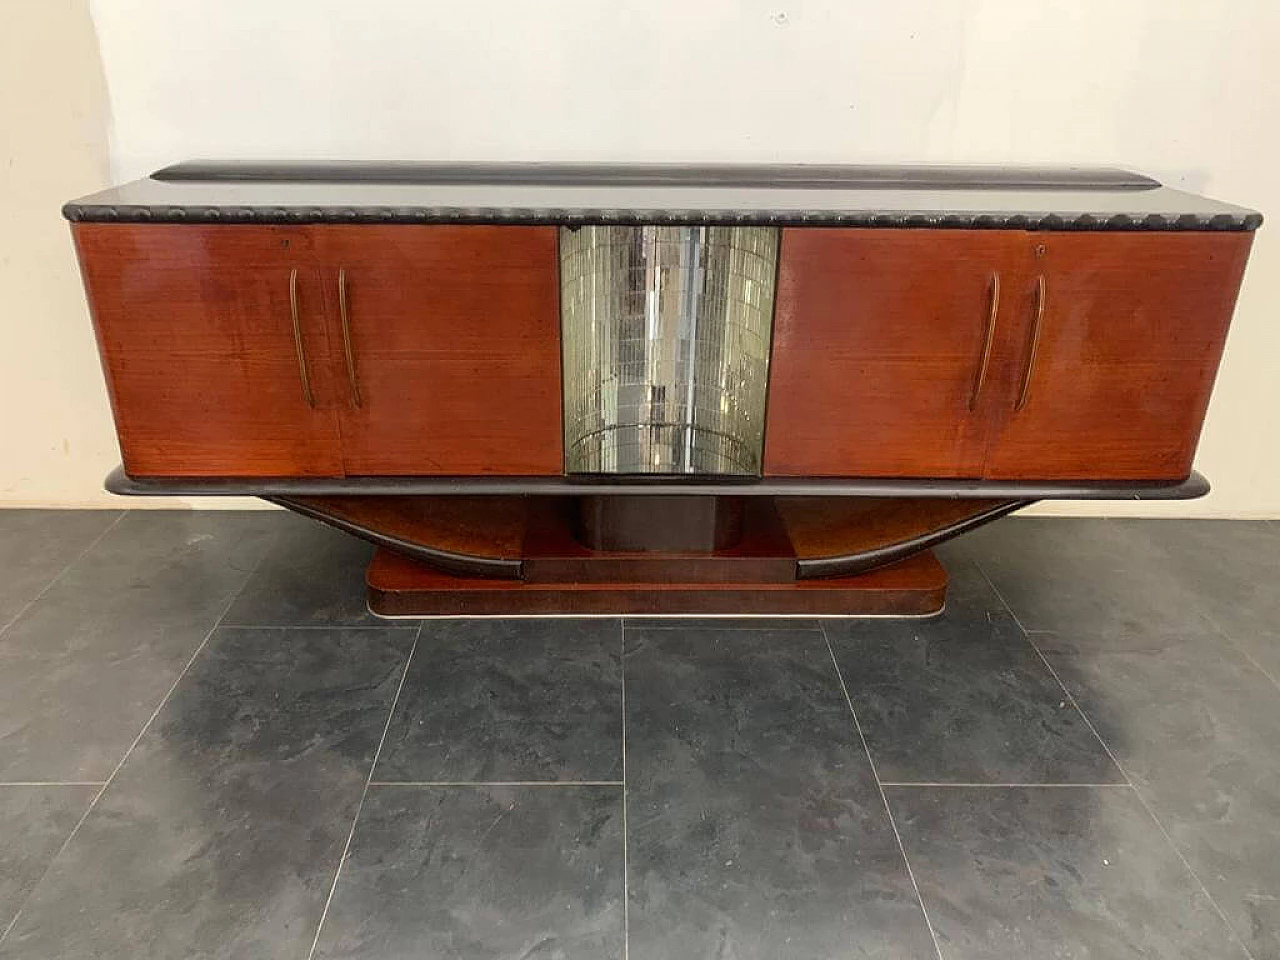 Mahogany sideboard with mirror niche, 1930s 1203034